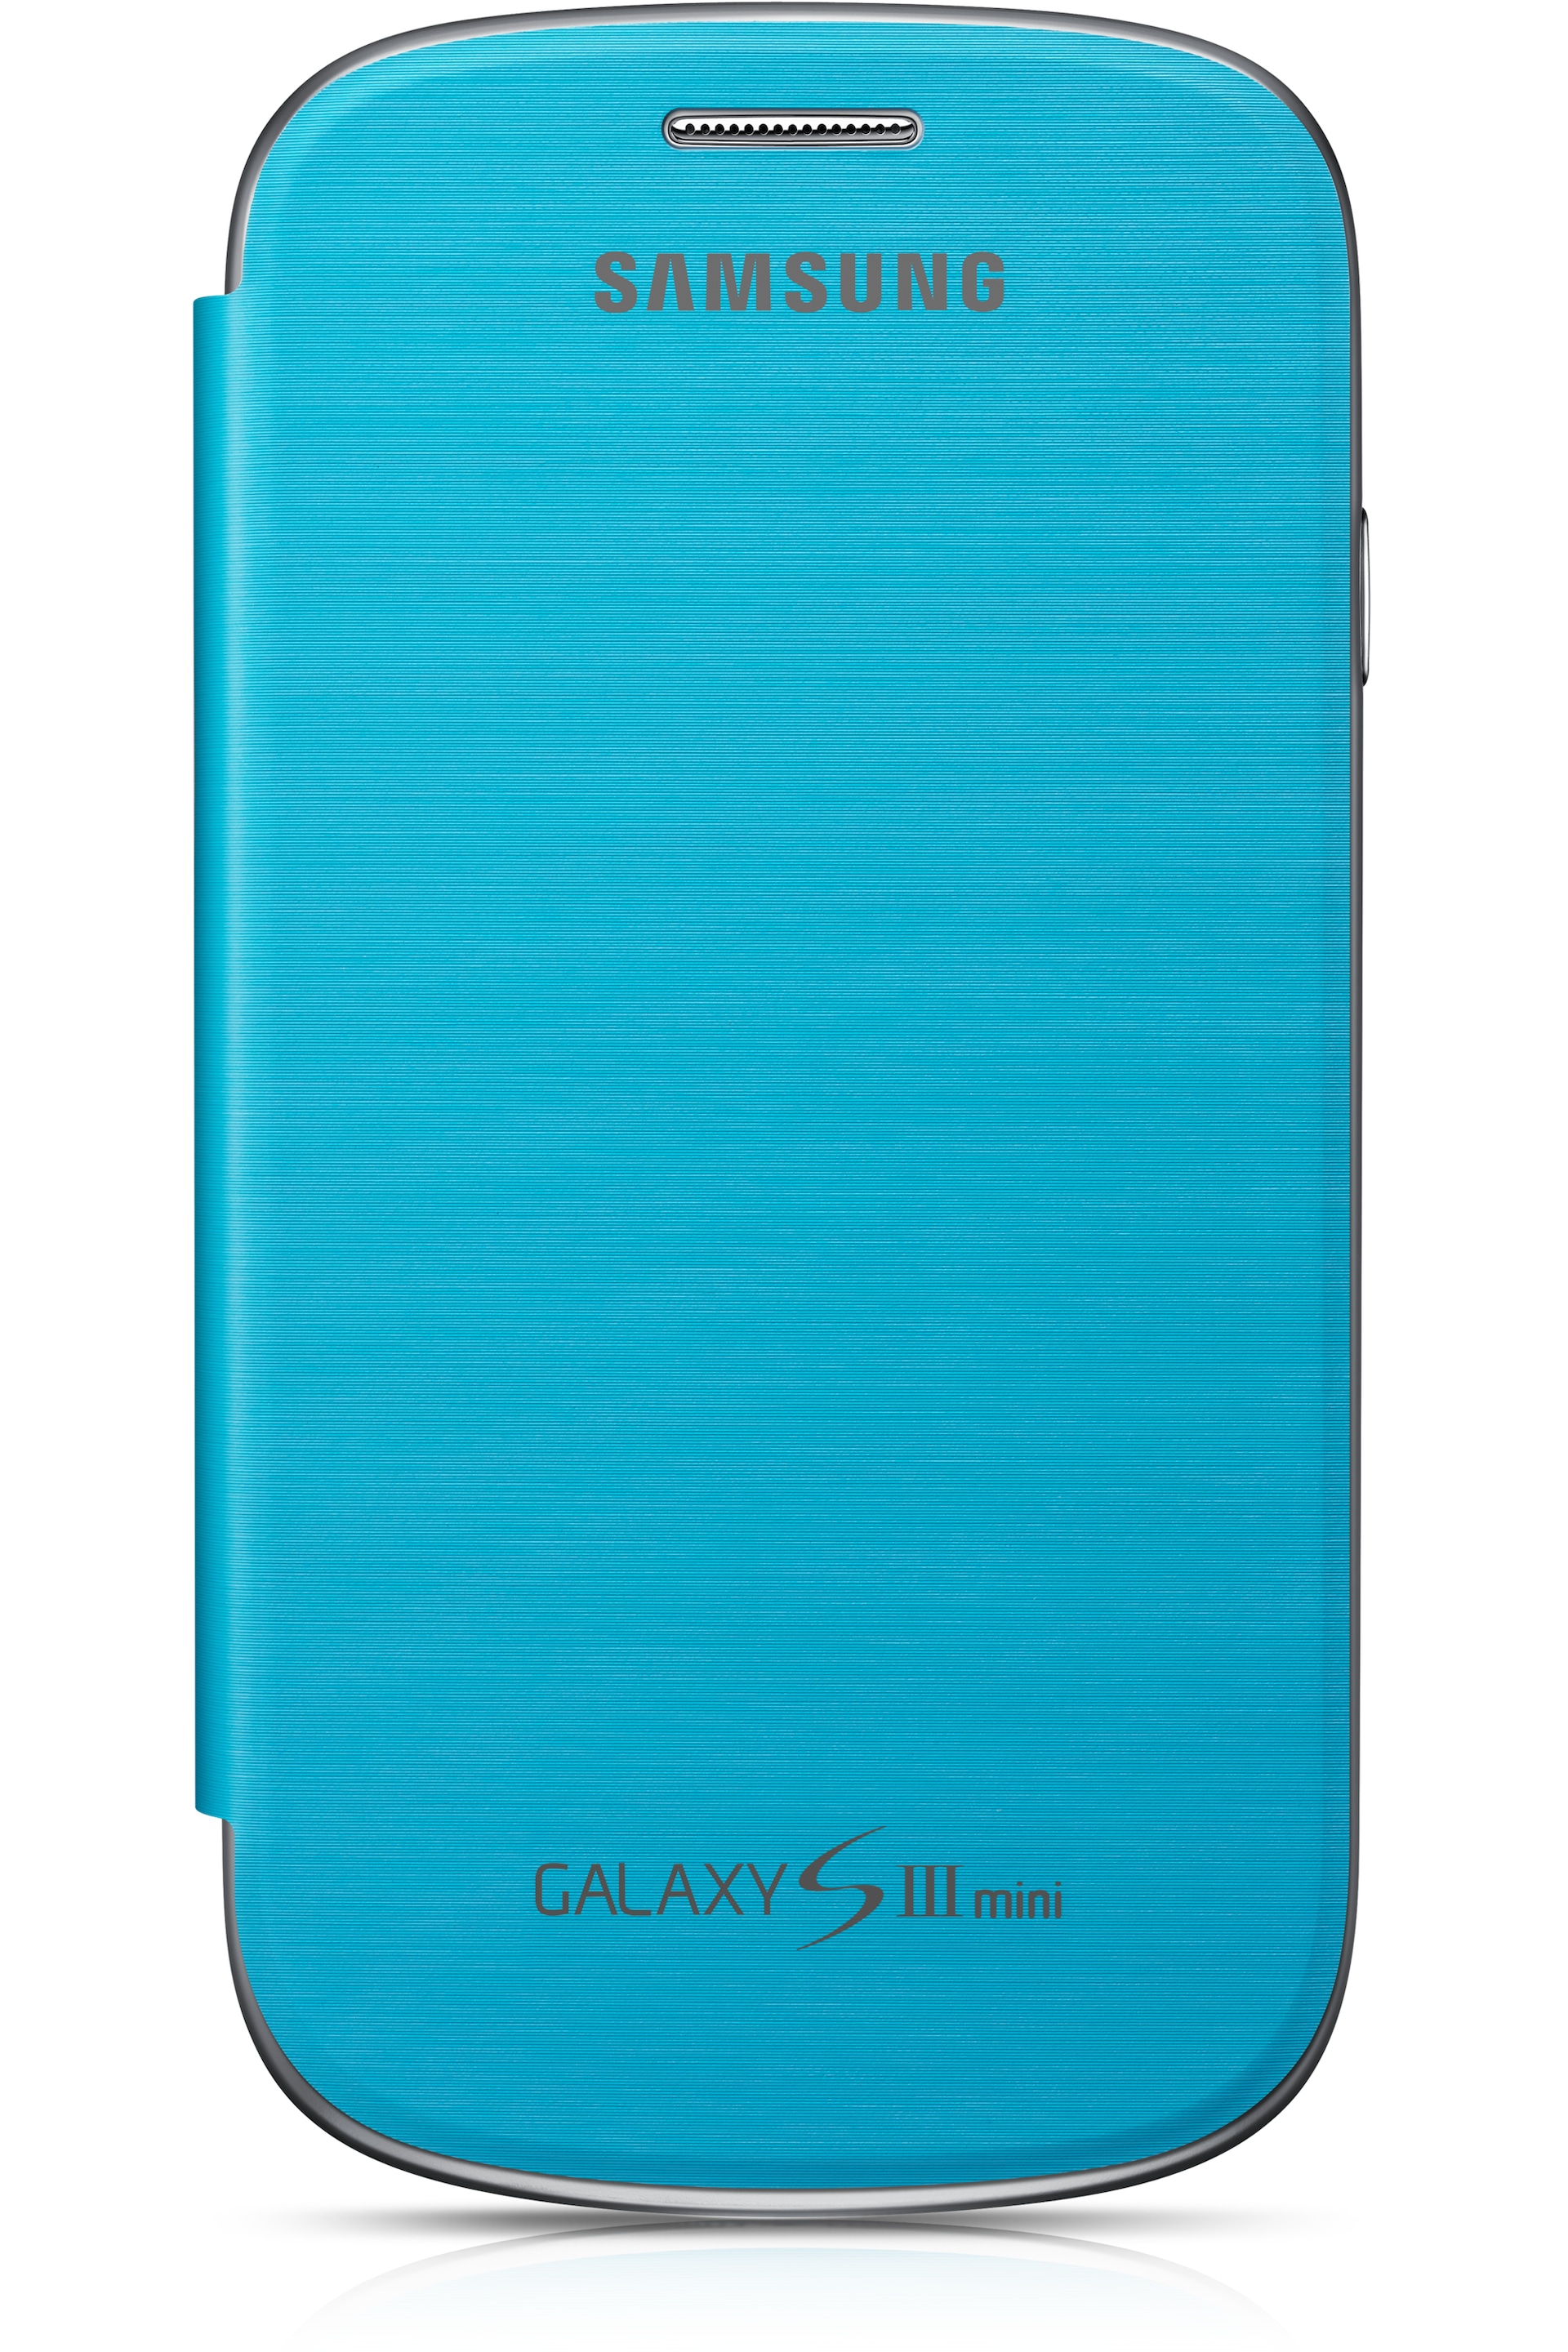 Levendig Excentriek instant Galaxy S3 mini Flip Cover | Samsung Support IE